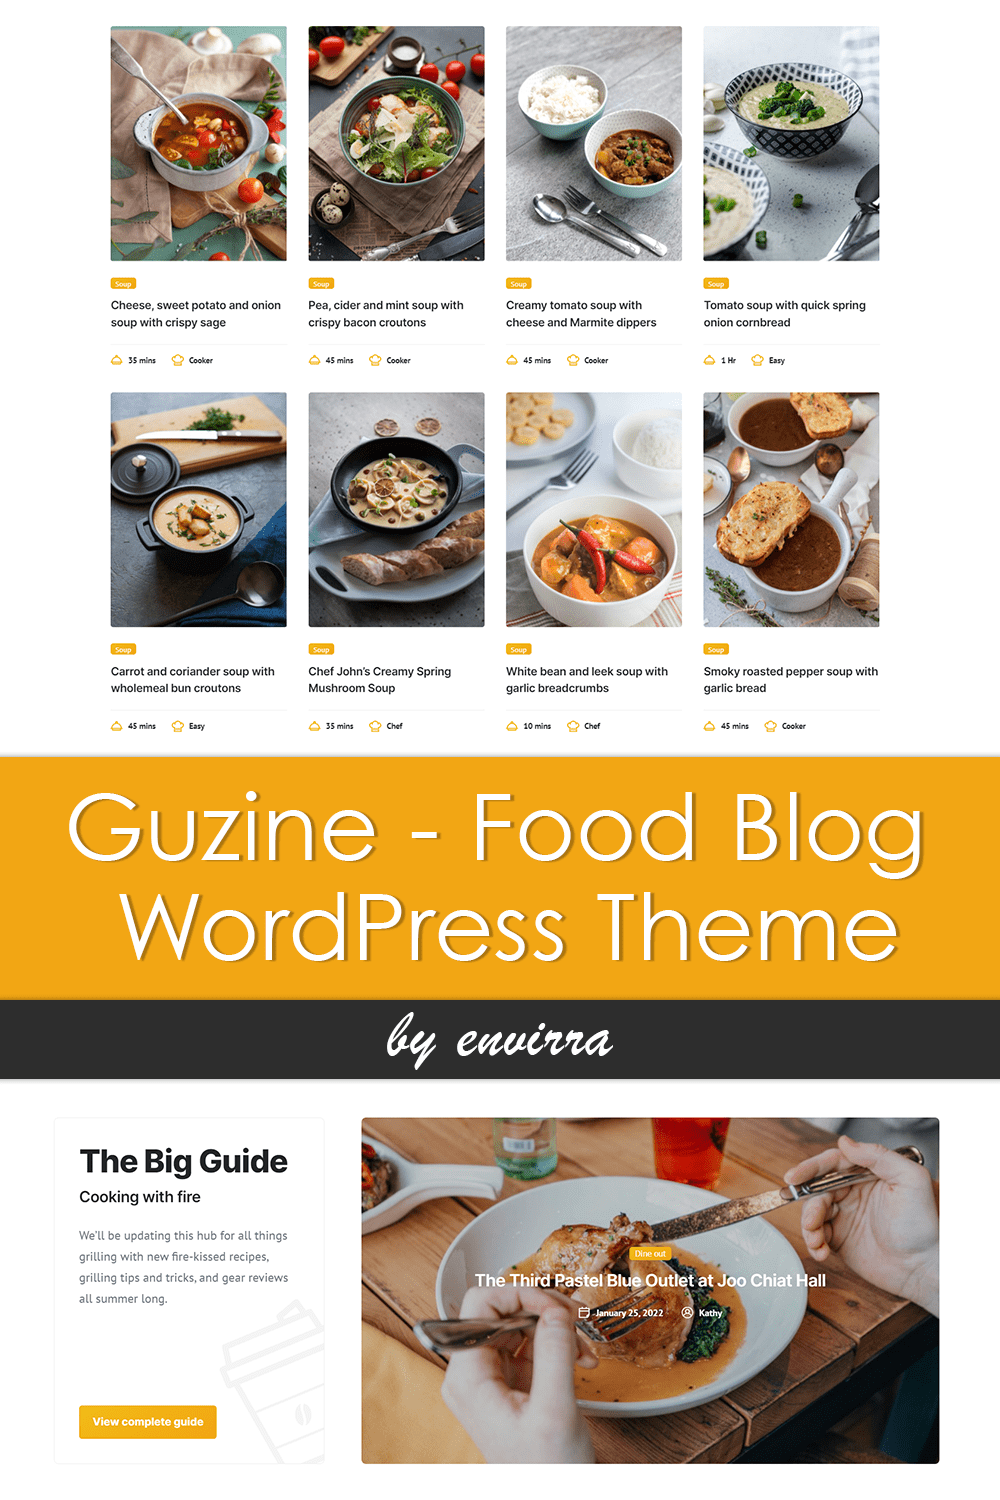 Examples of the different soups of the Guzine.